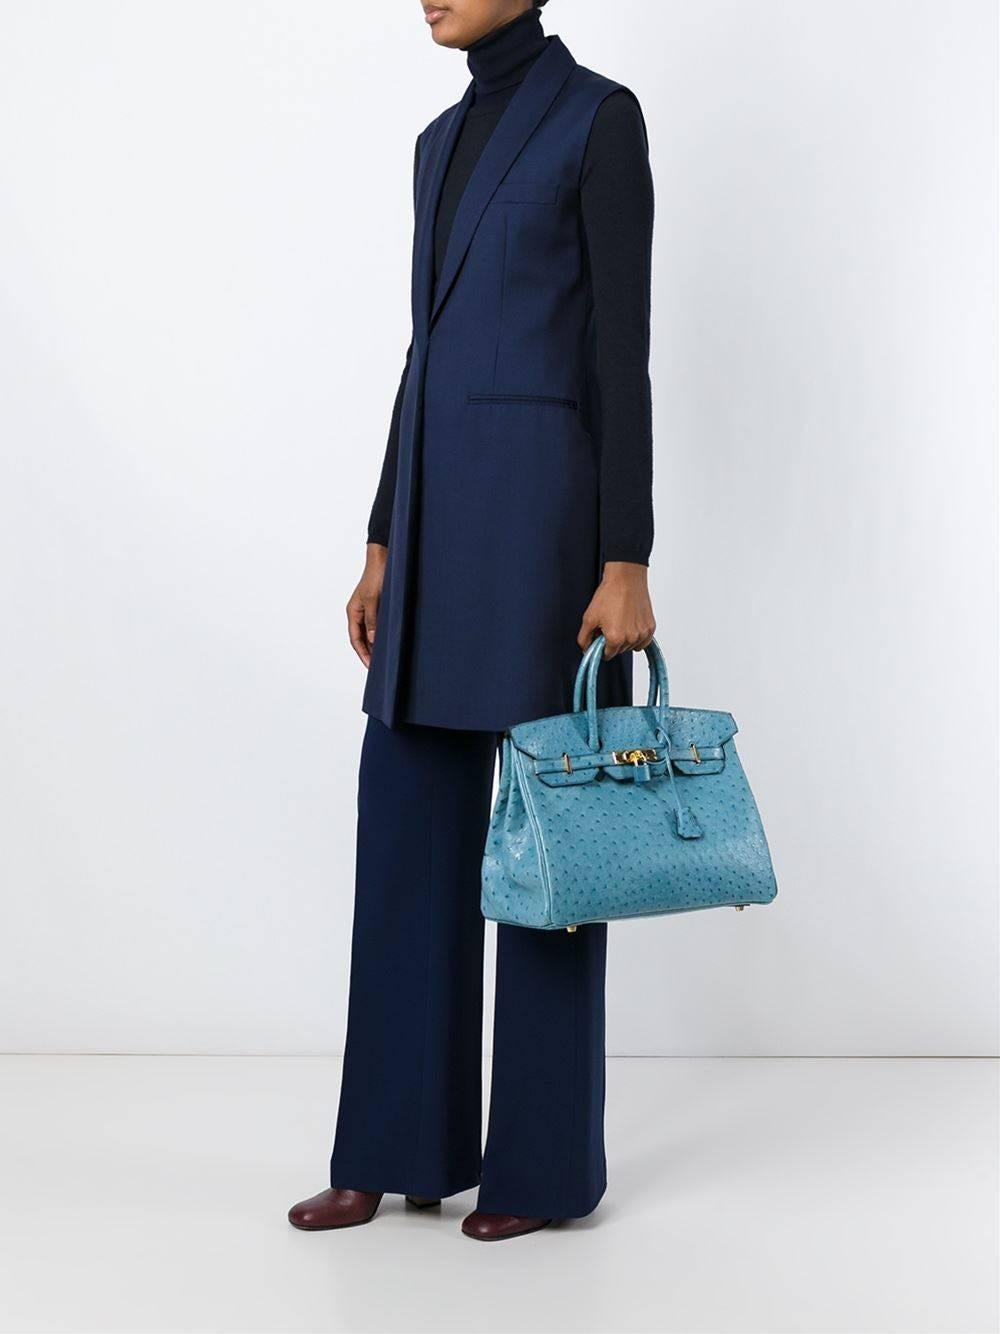 Exquisite Hermès Blue Jean Birkin bag, crafted in ostrich leather. Featuring gold- plated hardware and lined in blue jean leather this bag boasts one zipped and one open pocket.

This bag comes with its original lock and key.

Material: Ostrich